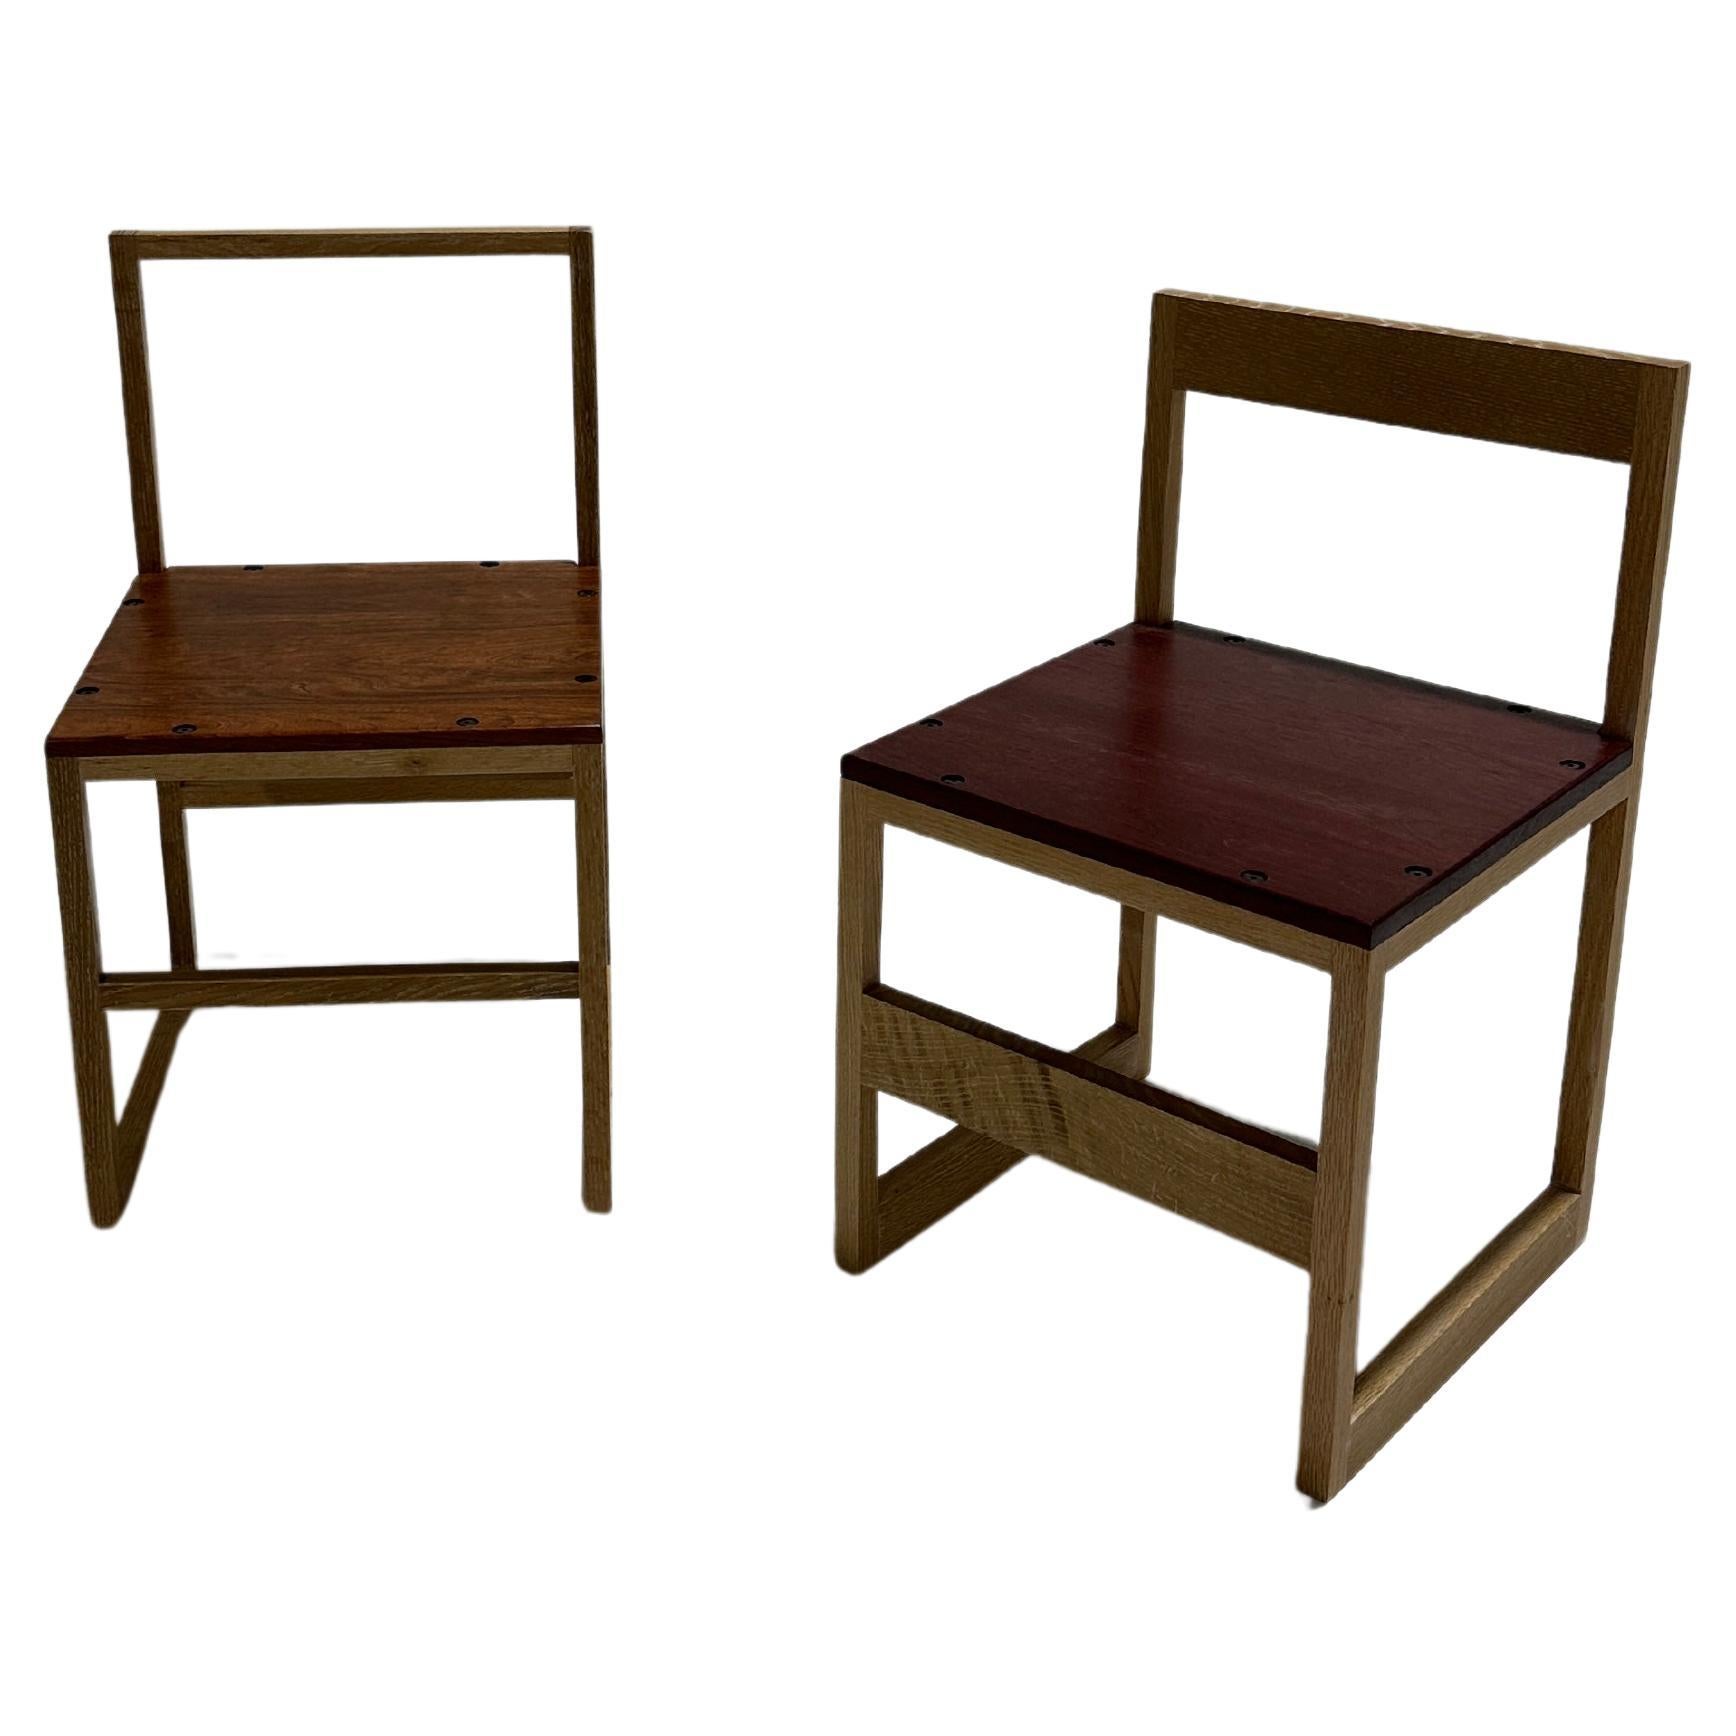 Mayfly Studio - American Craft White Oak Side Chairs For Sale